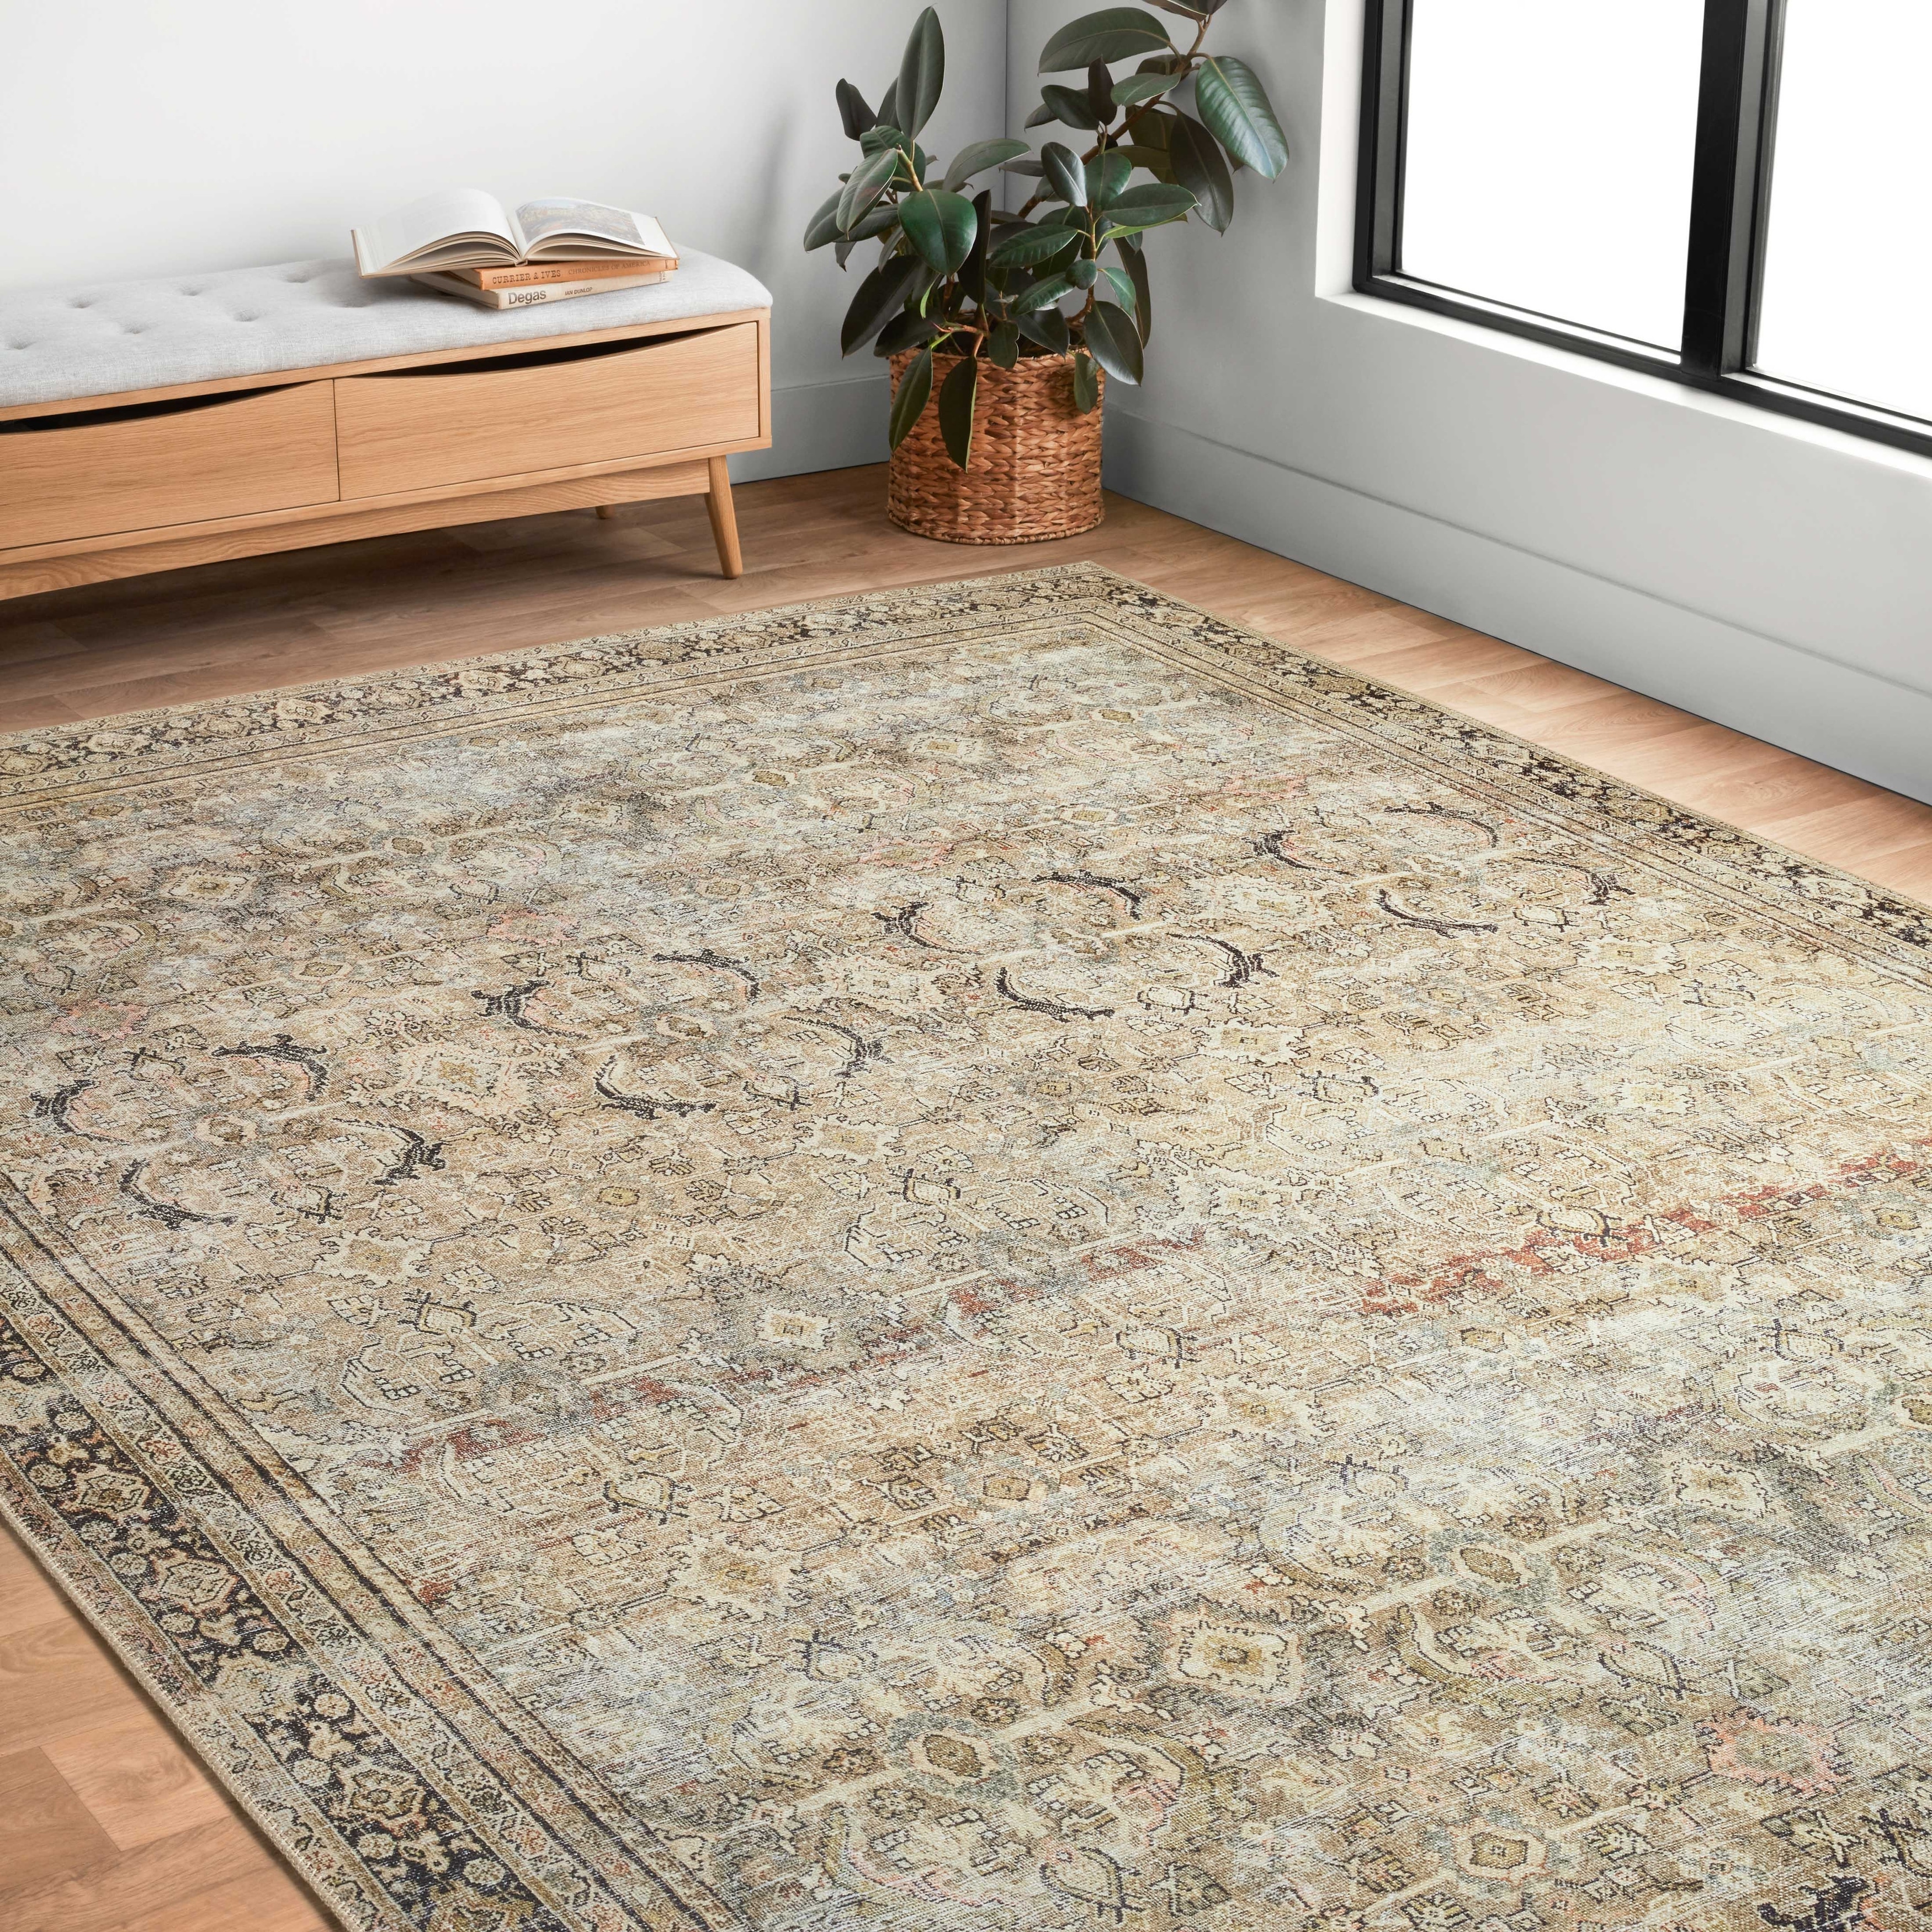 How to Keep Entry Rugs Clean - The Chronicles of Home